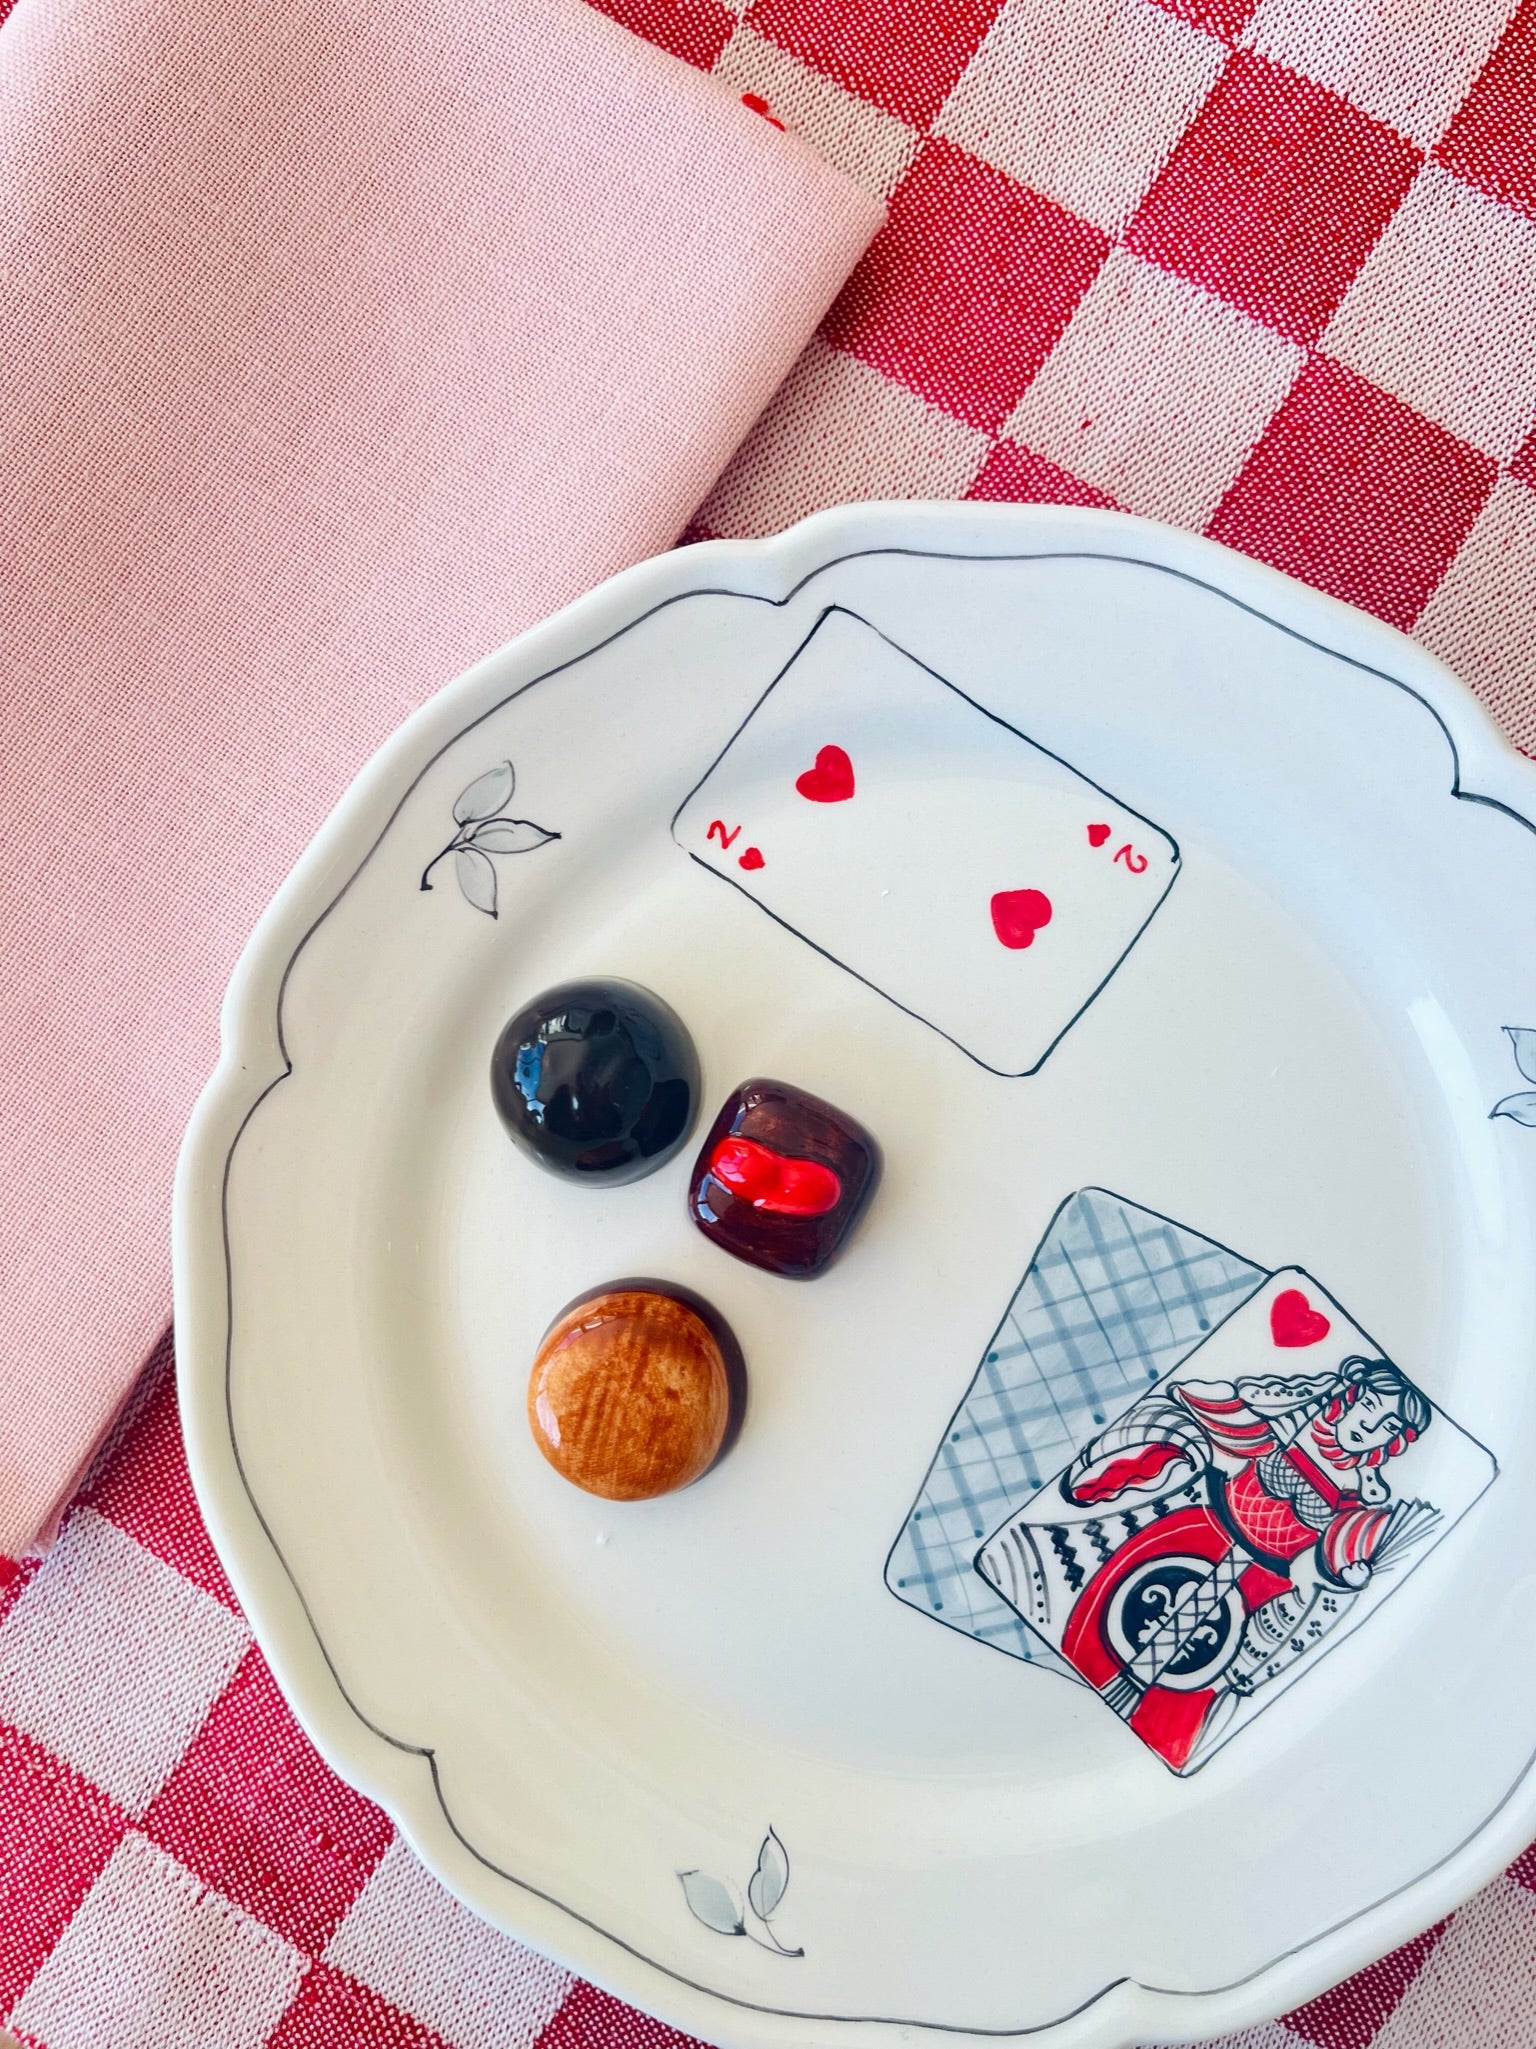 Queen of Hearts Trompe L'œil Plate with Chocolates